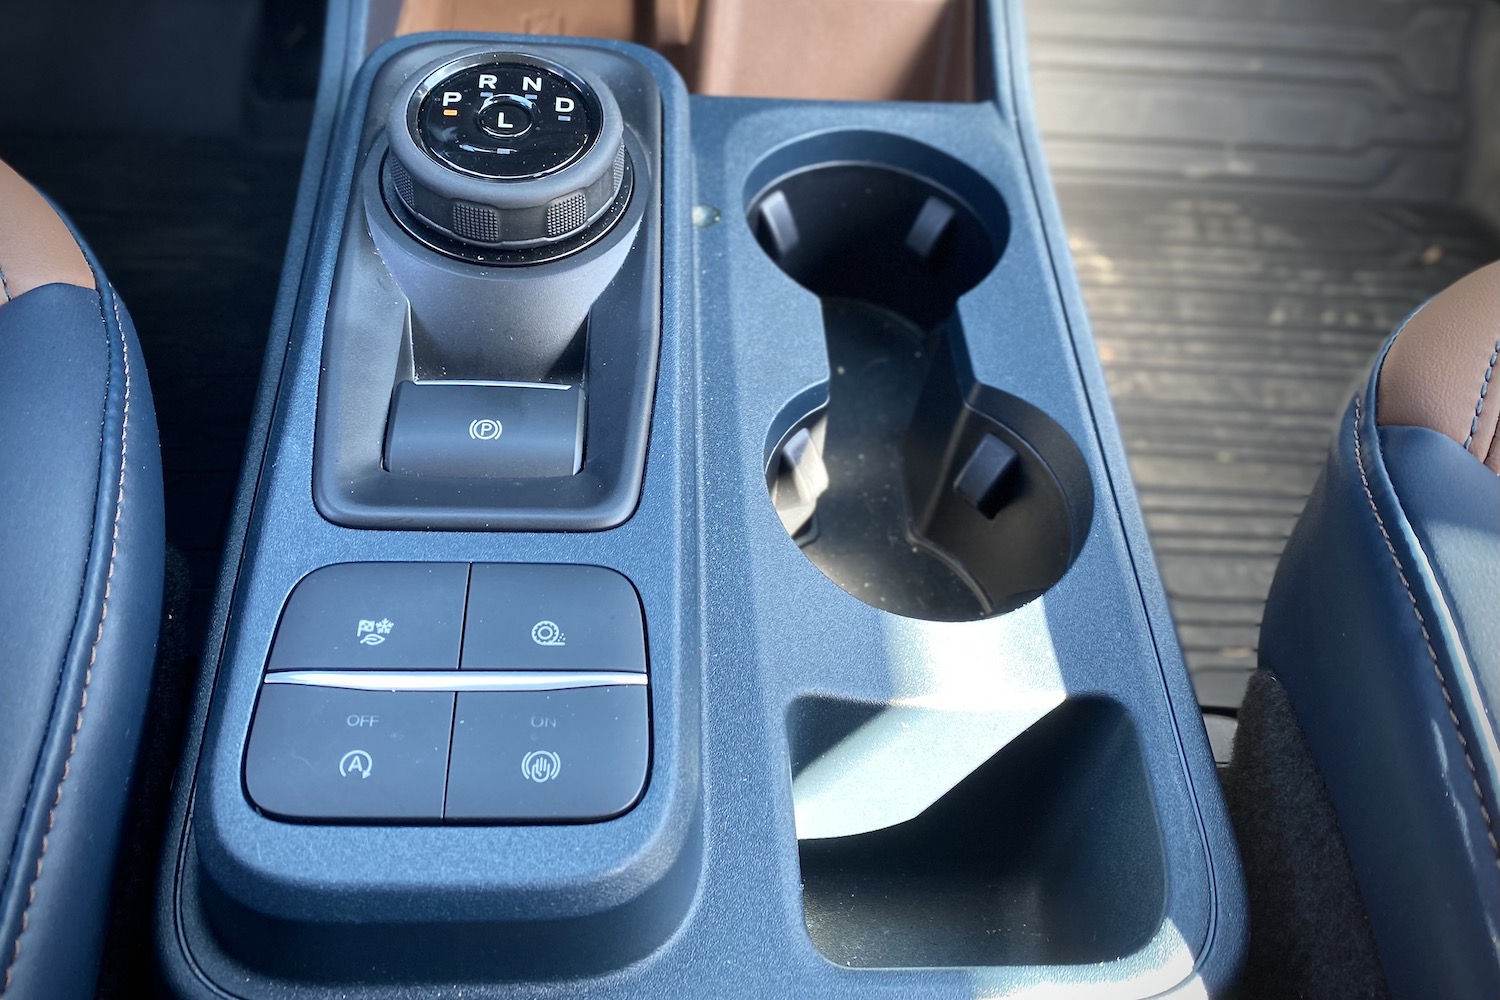 Close up of 2022 Ford Maverick center console button and shift dial.